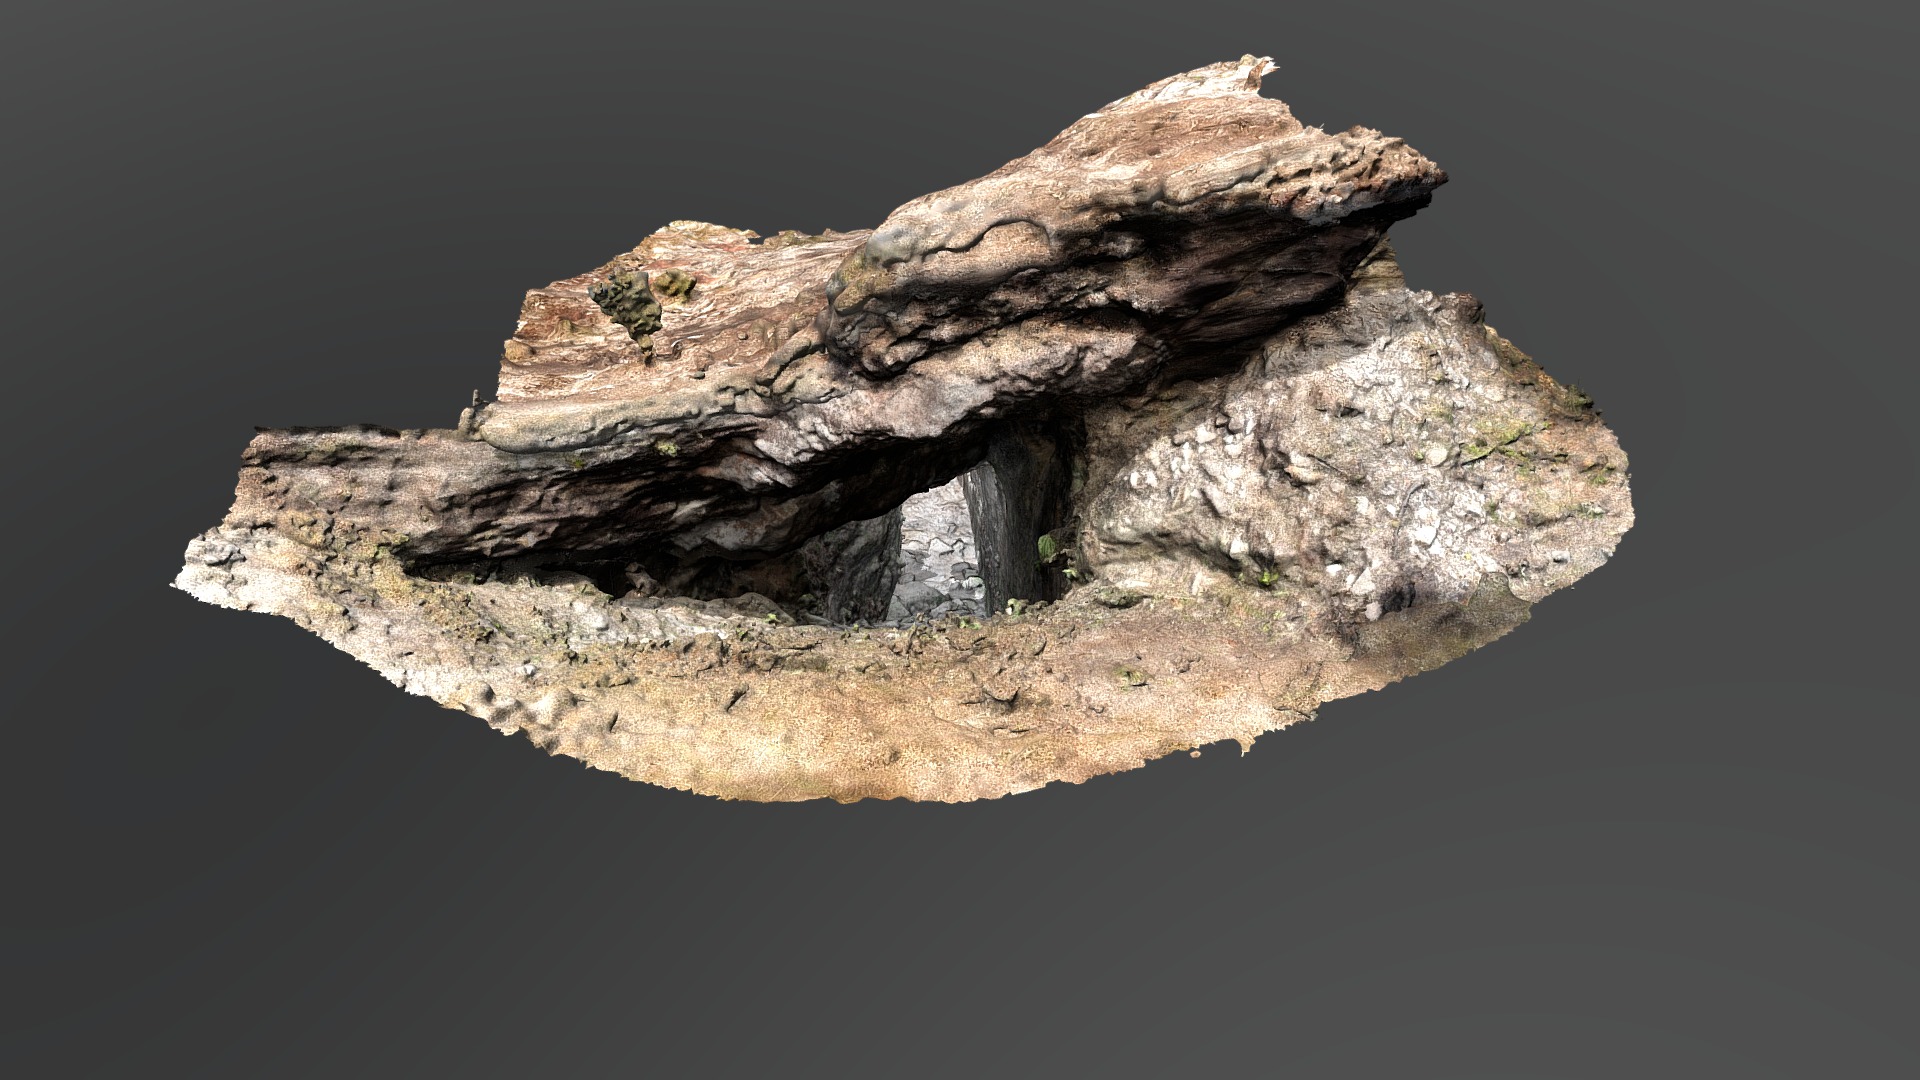 3D model Minas do Morro da Queimada - This is a 3D model of the Minas do Morro da Queimada. The 3D model is about a log on a rock.